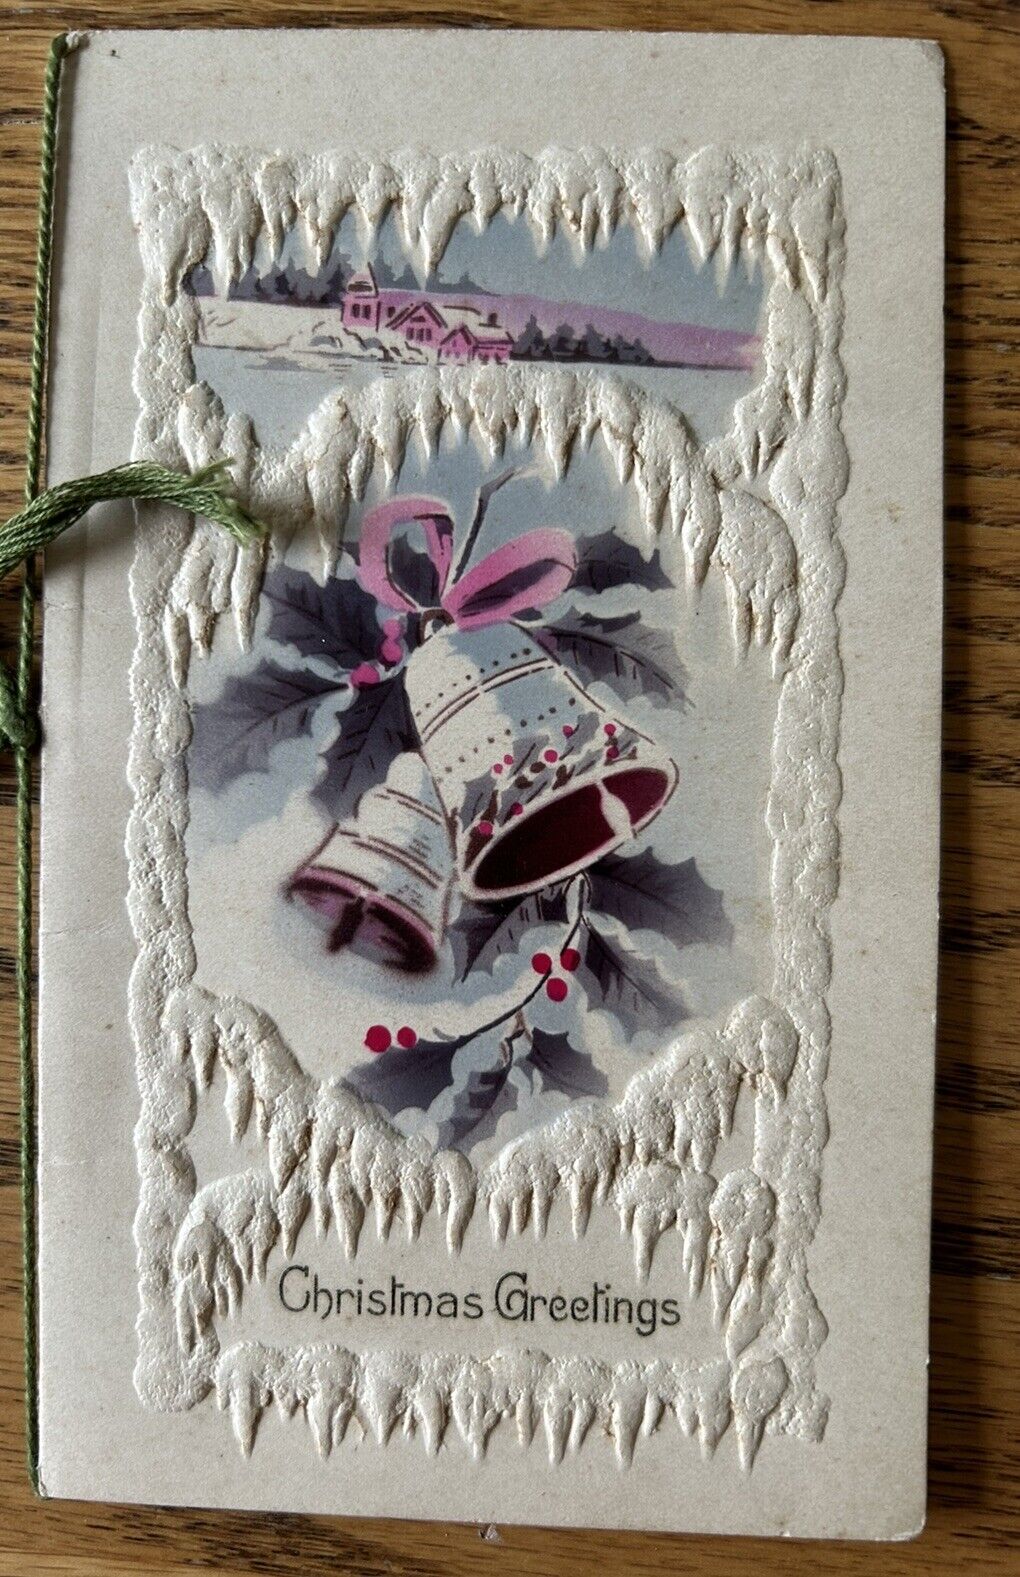 Vintage/Antique Christmas Card made in Germany. Early 1900s 